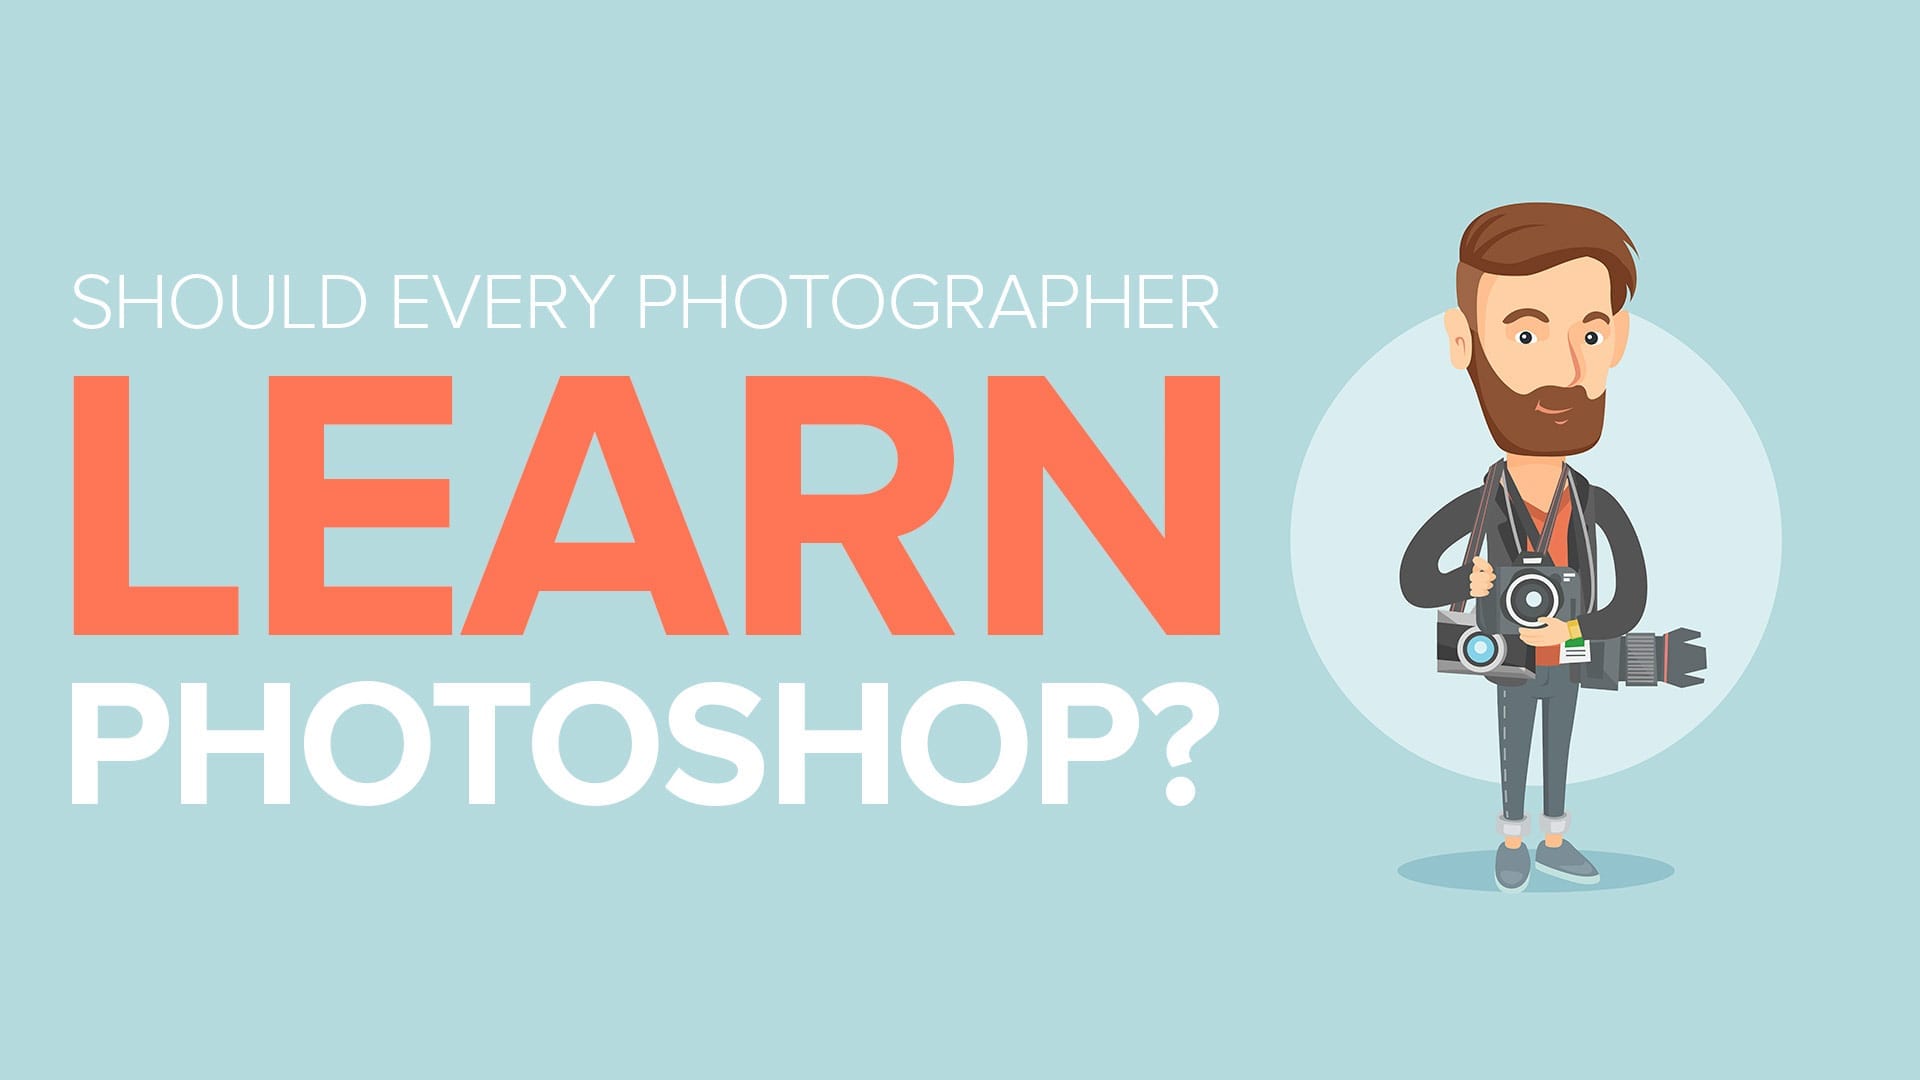 Should Every Photographer Learn Photoshop?